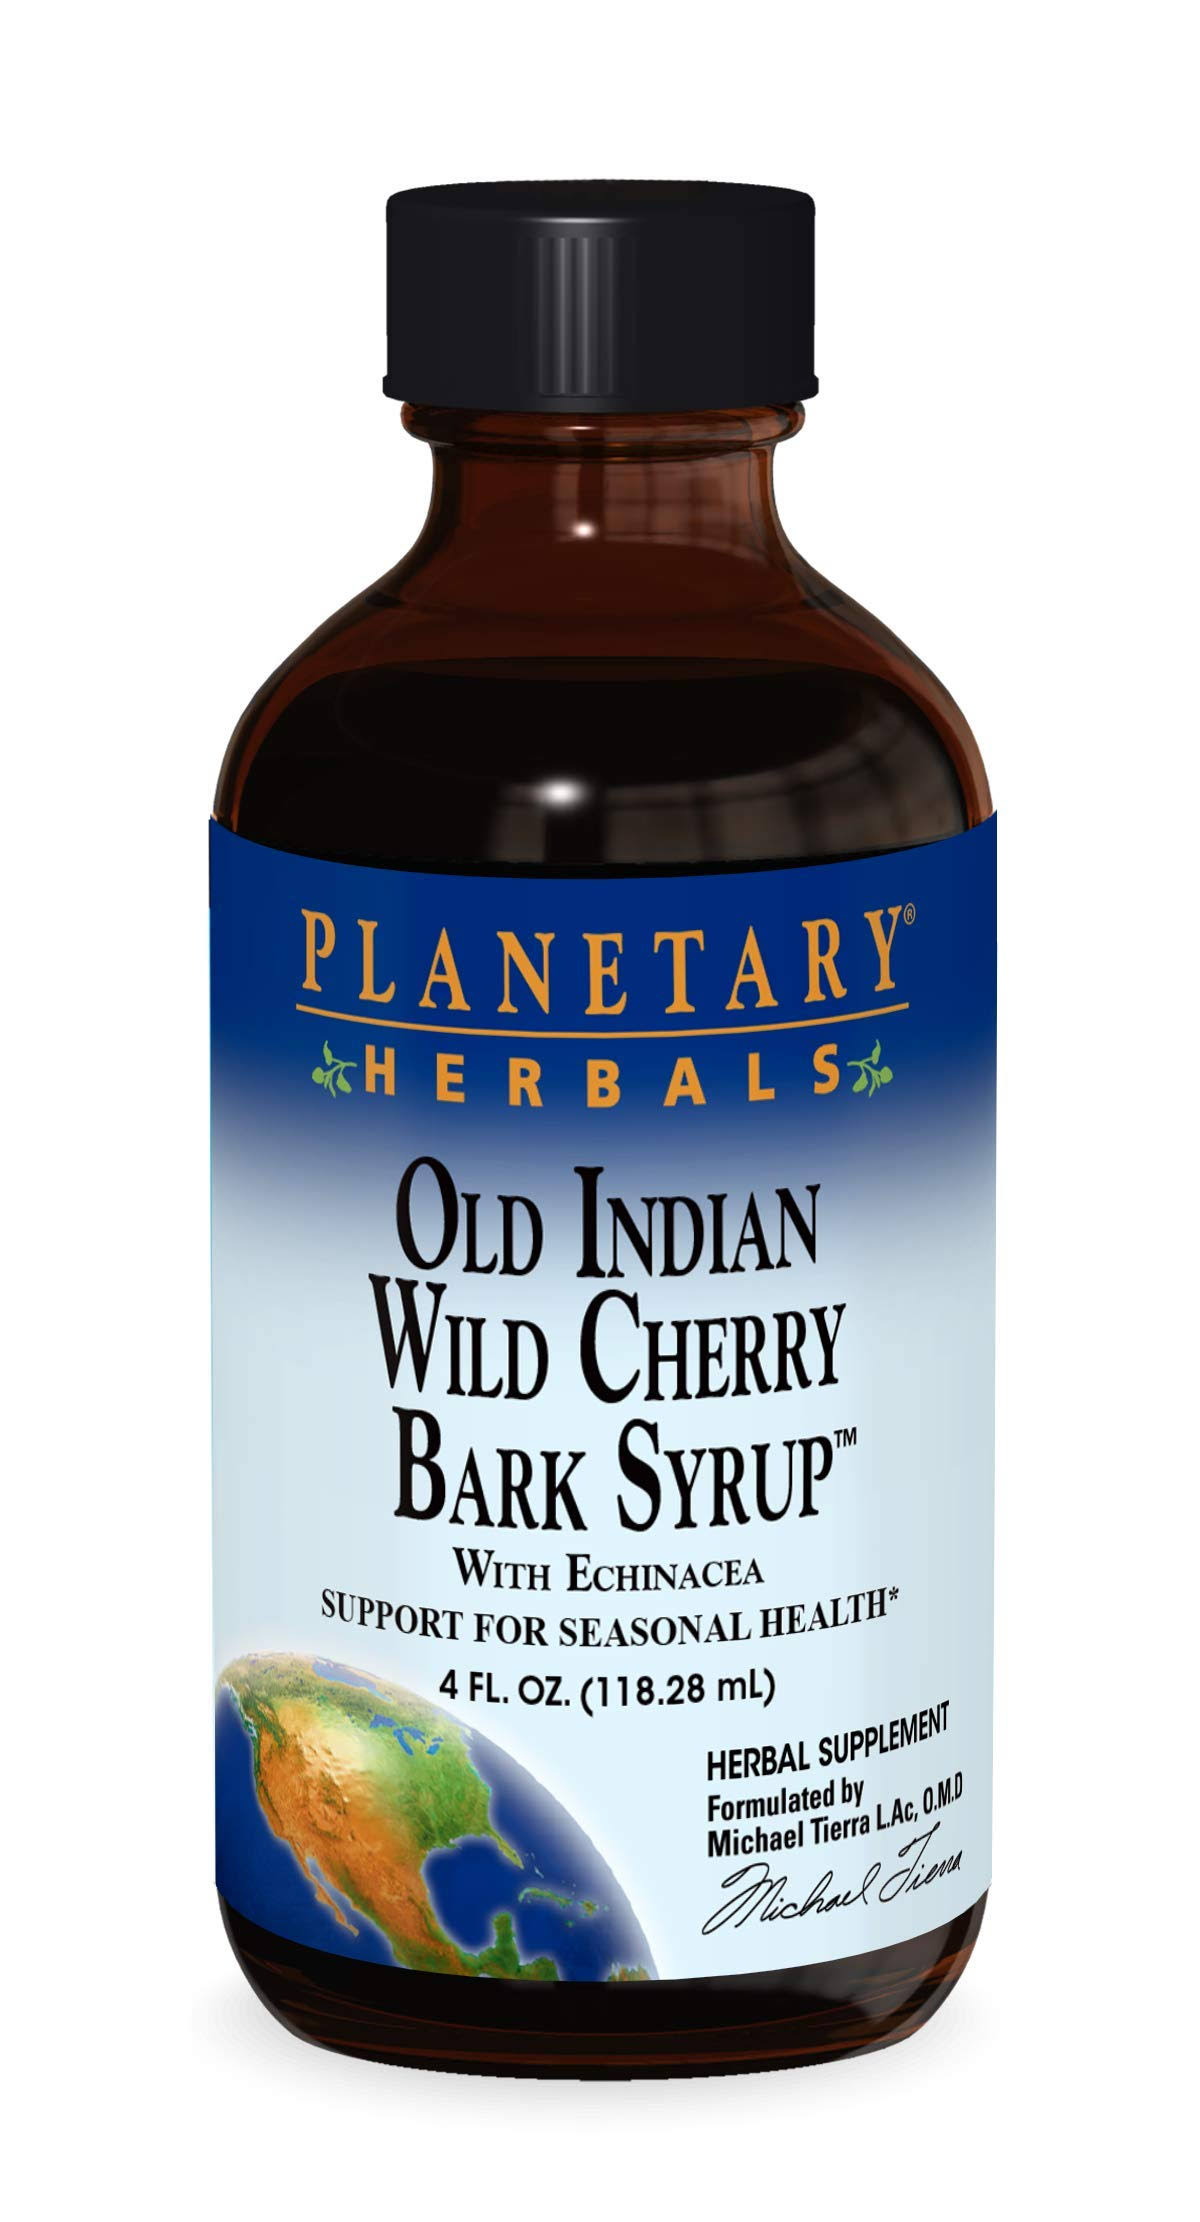 Planetary Herbals Old Indian Wild Cherry Bark Syrup Herbal Supplement - 4oz